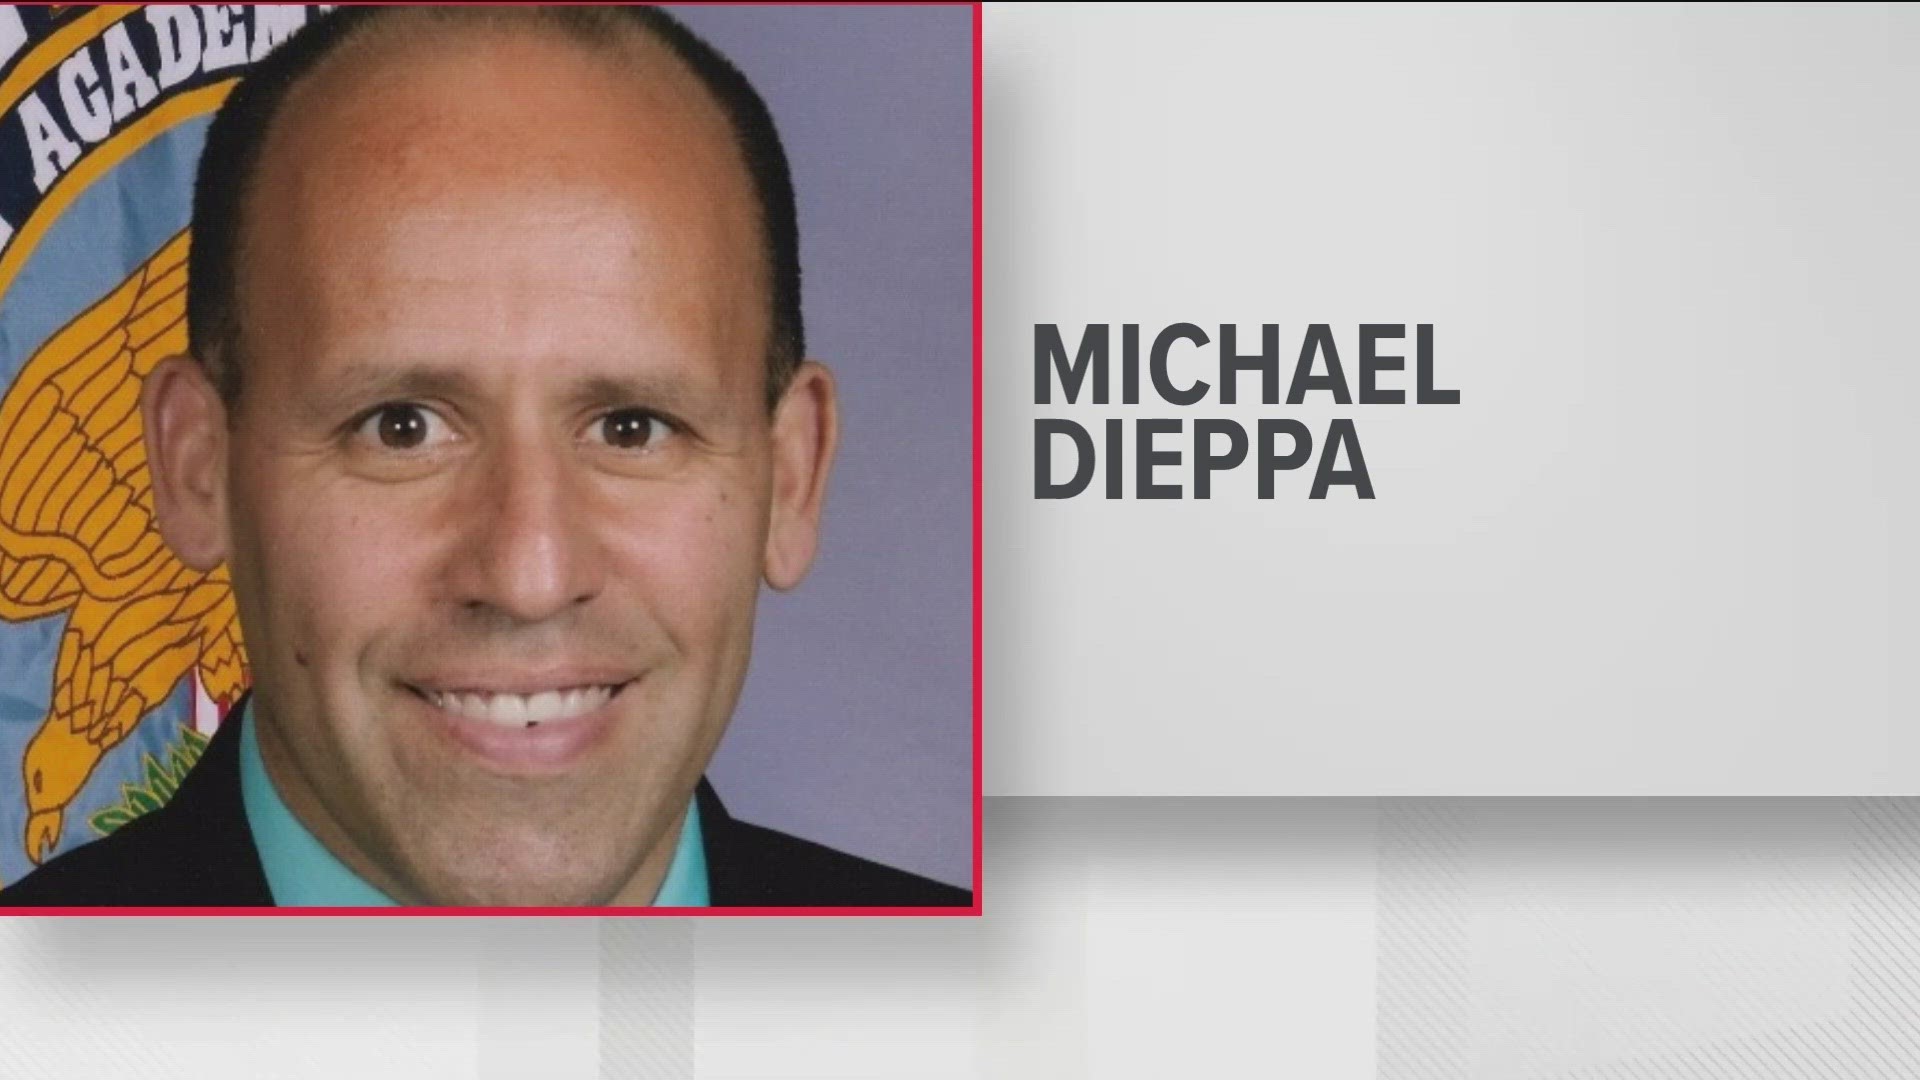 Officials selected Michael Dieppa for the job.